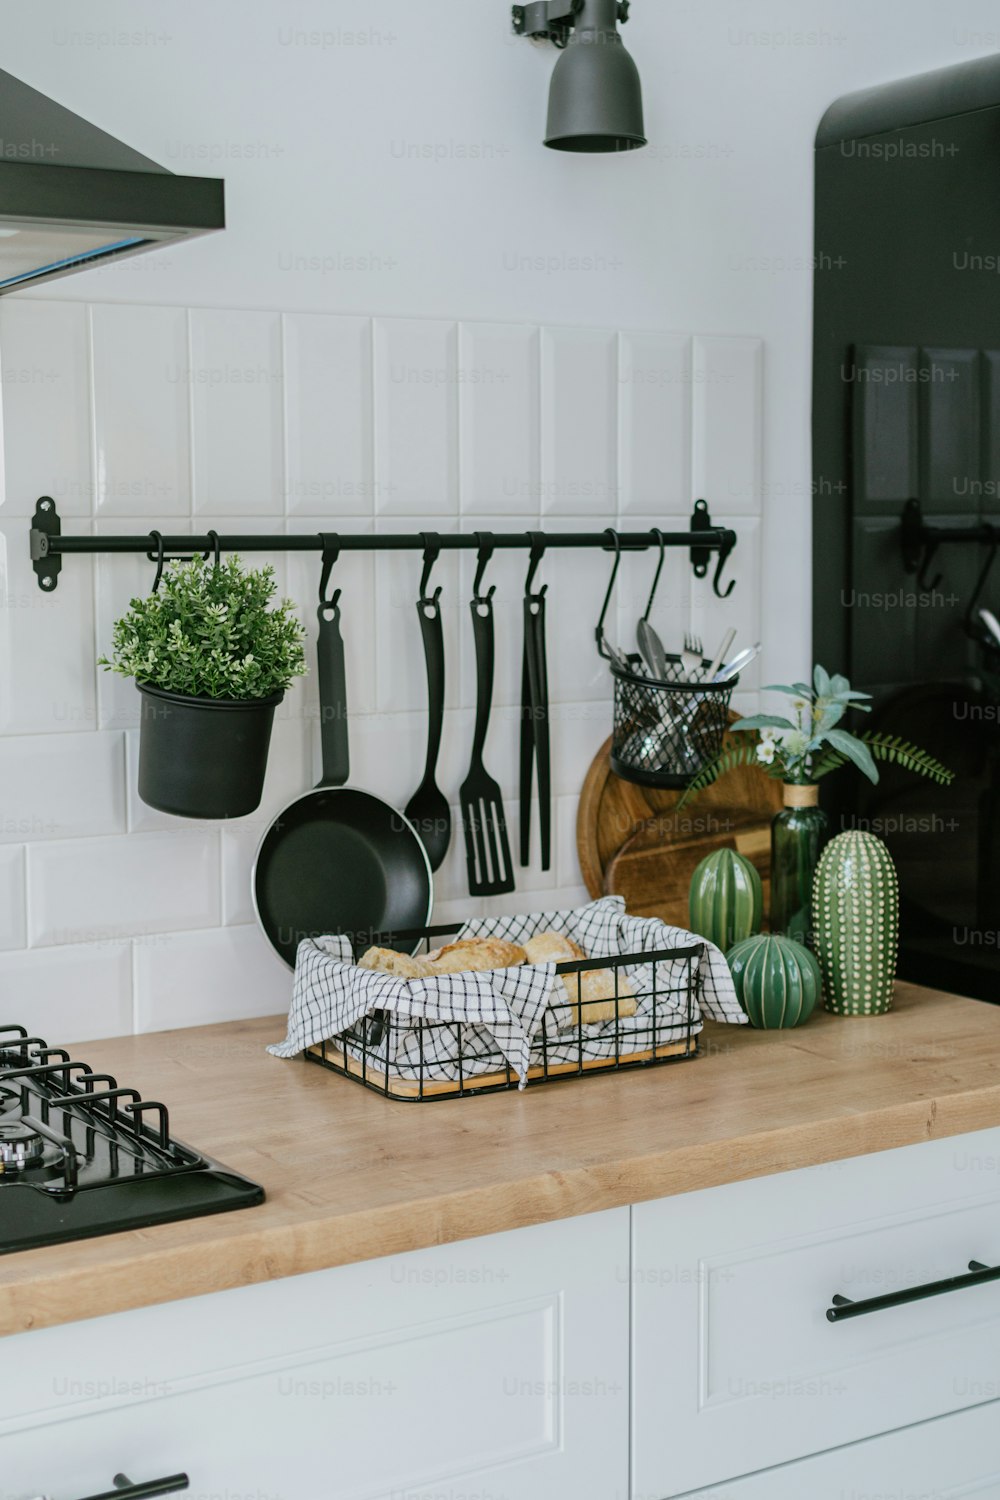 a kitchen counter with pots and pans on it